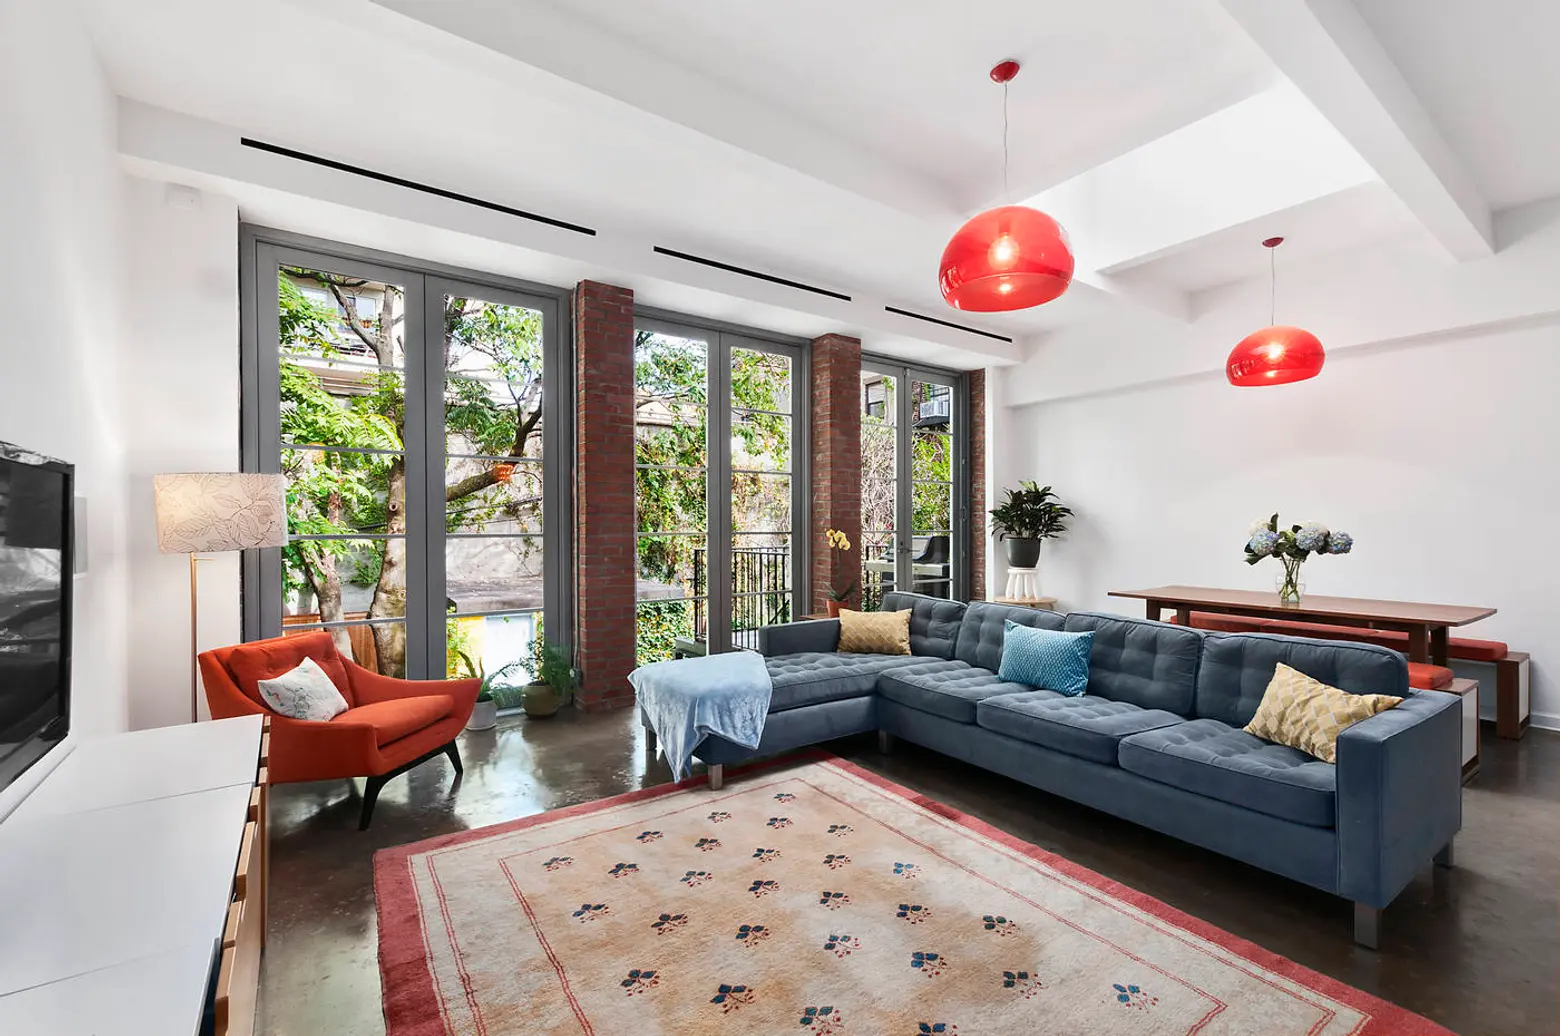 Big, Bright and Modern Boerum Hill Townhouse Has It All, Plus Rental Income